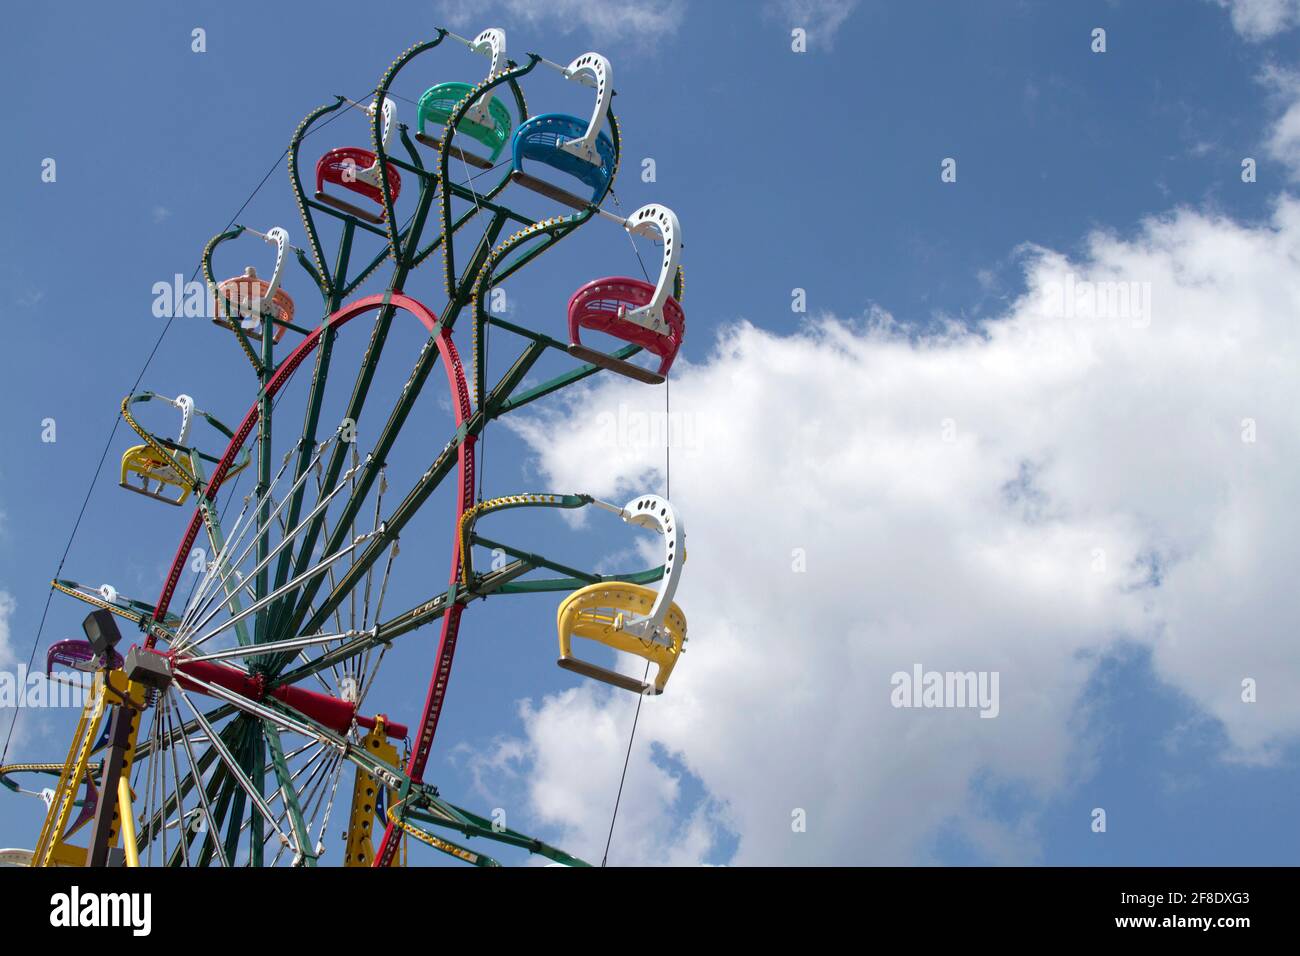 A Families have fun riding a colorful ferris wheel up, down and around through a blue skiy and clouds on a summer day Stock Photo